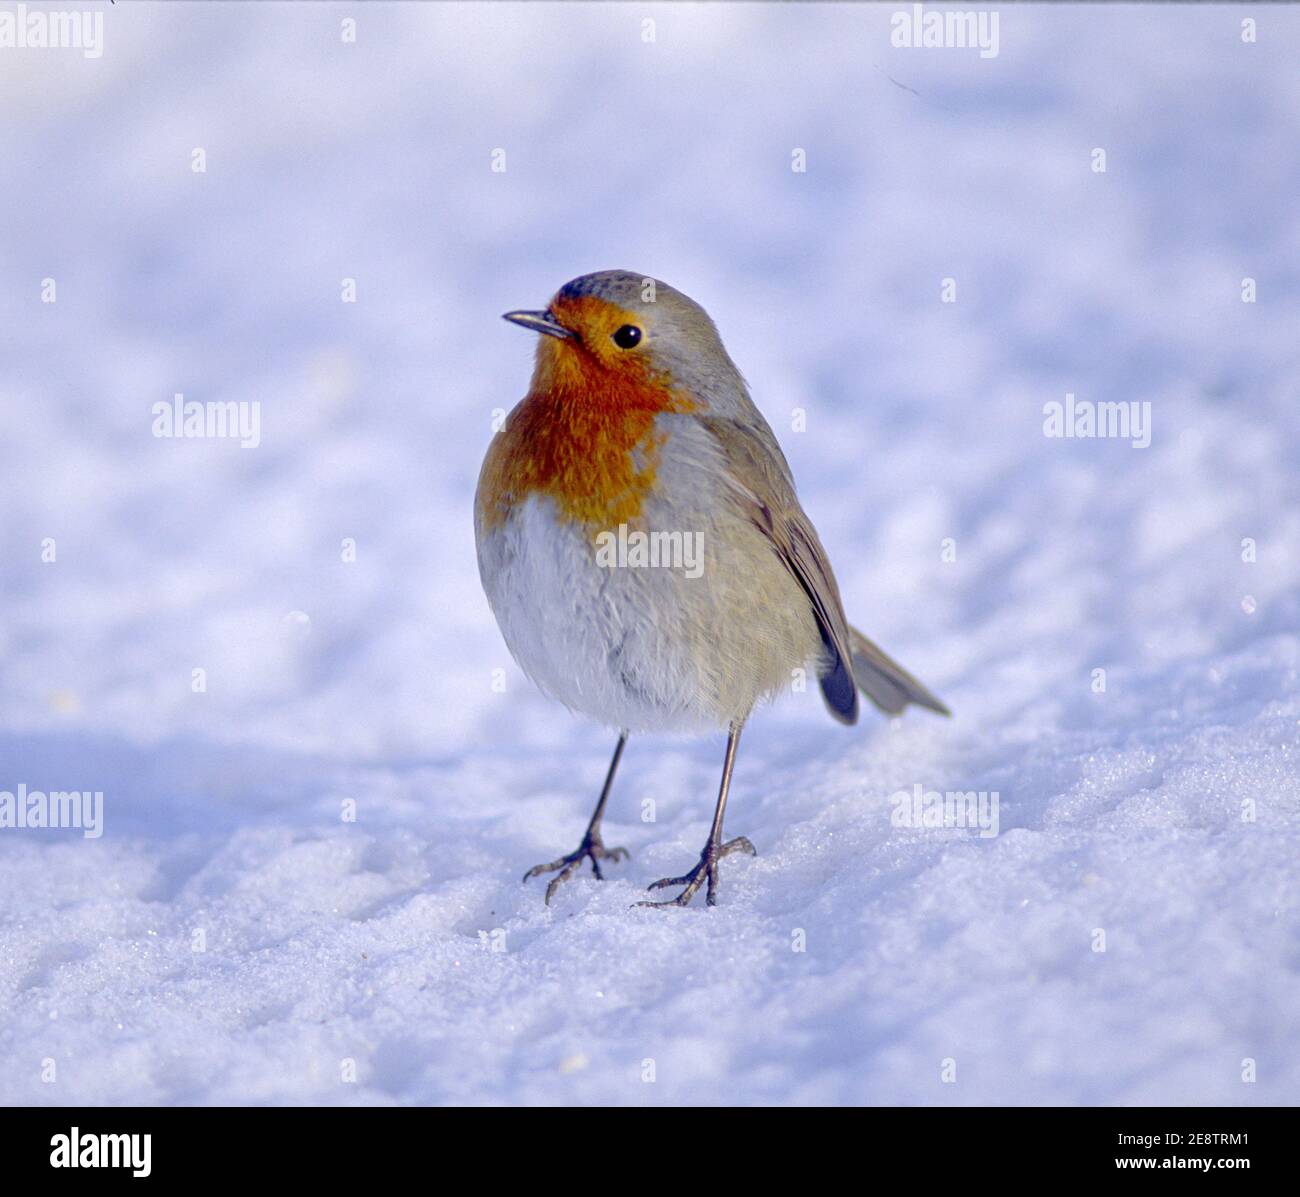 A UK robin (Erithacus rubella) foraging for food after a fresh snowfall. Stock Photo